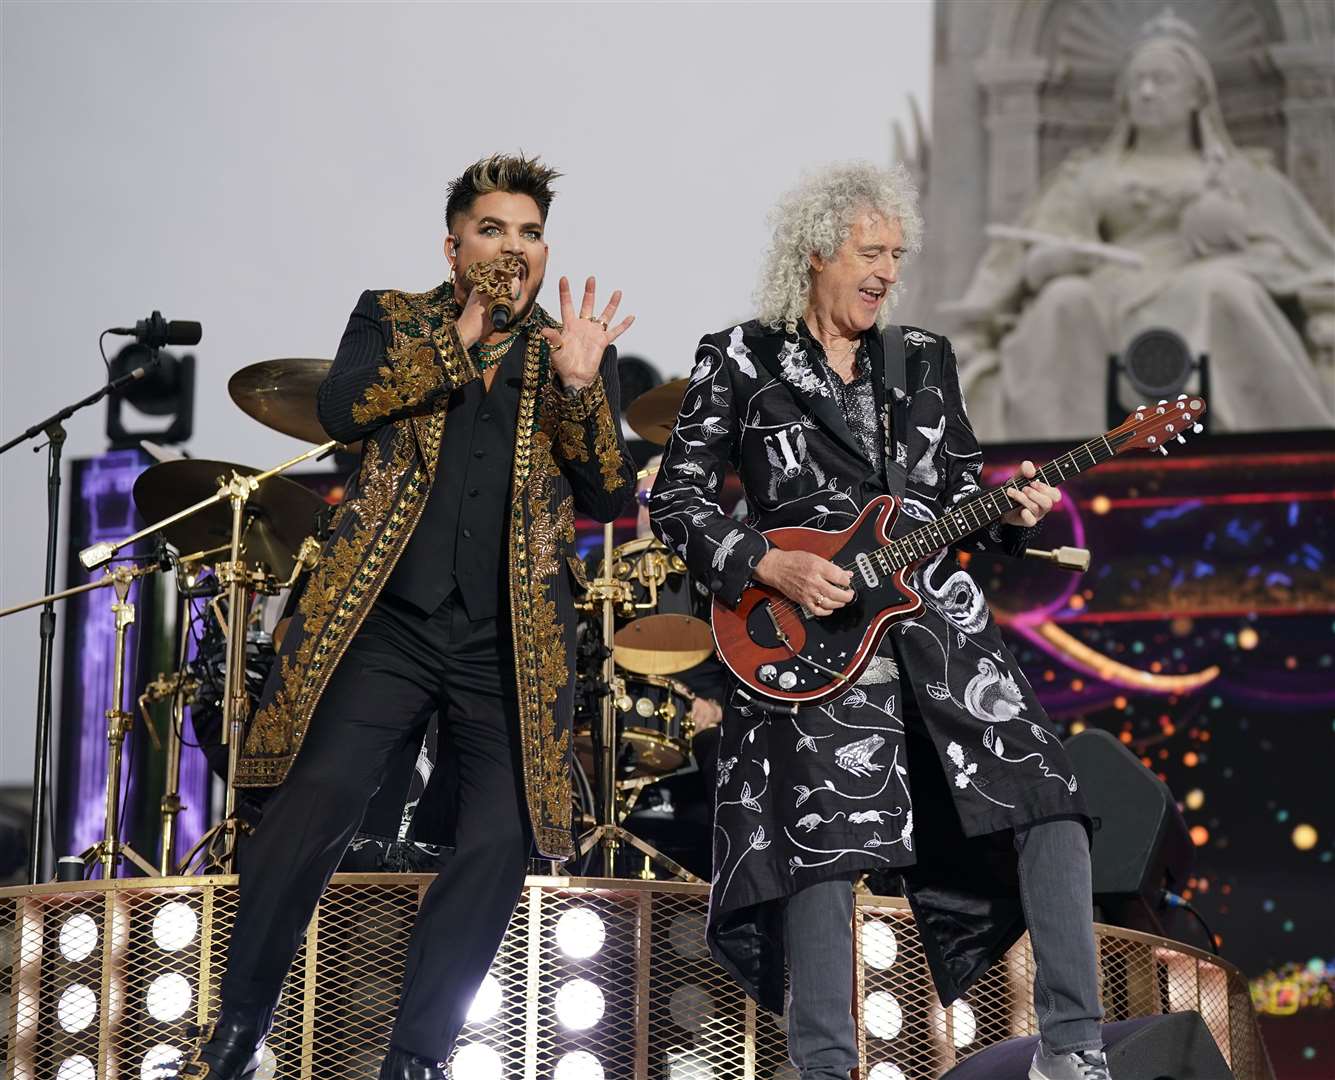 Queen + Adam Lambert at the Platinum Party at the Palace (Yui Mok/PA)